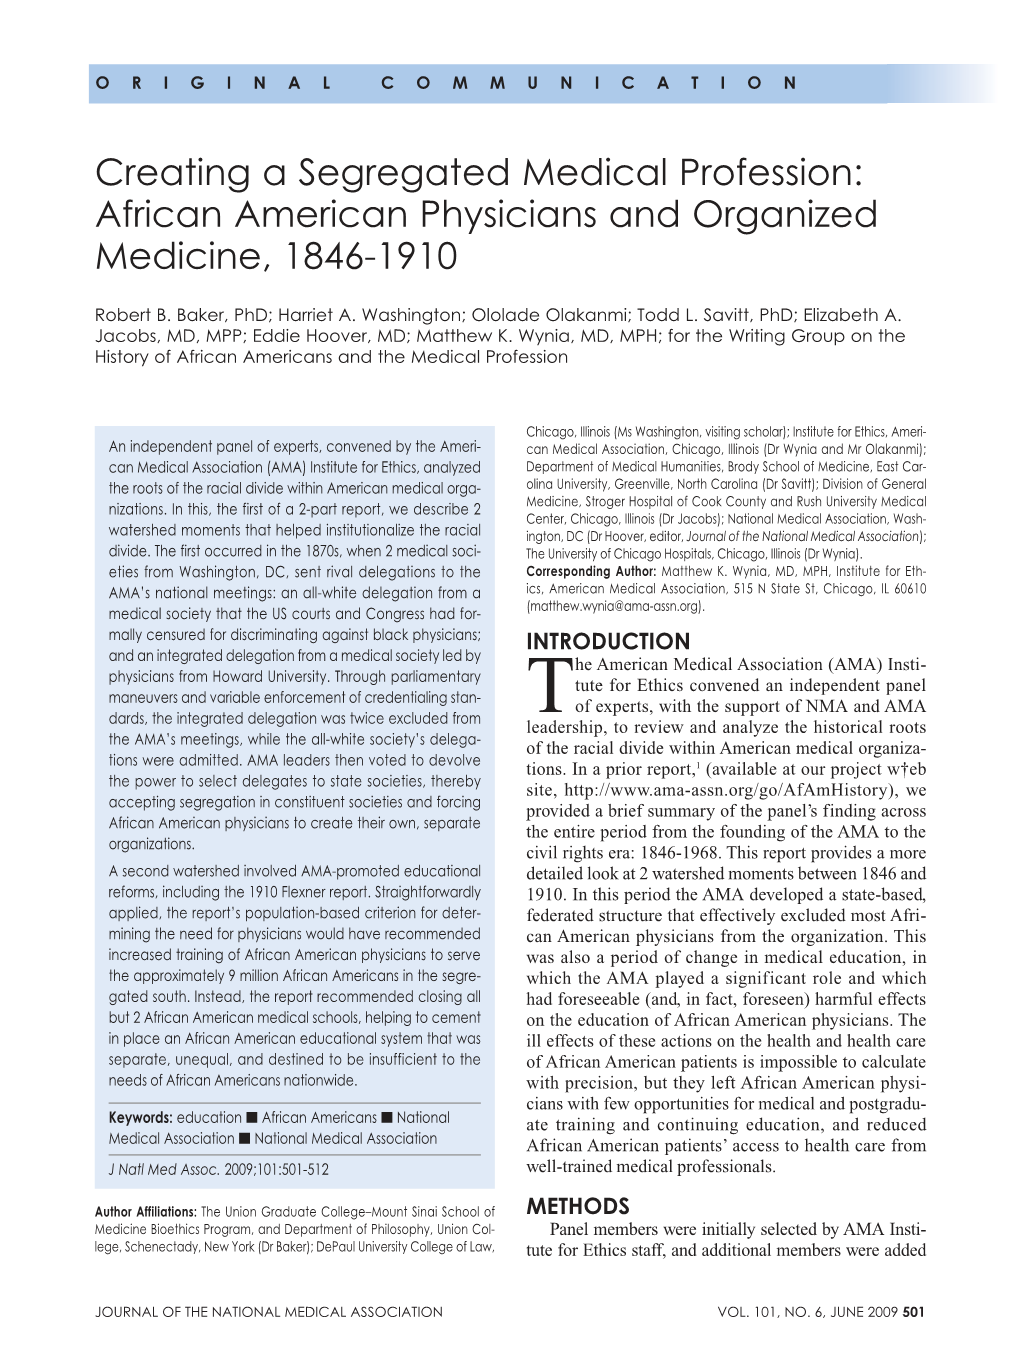 Creating a Segregated Medical Profession: African American Physicians and Organized Medicine, 1846-1910